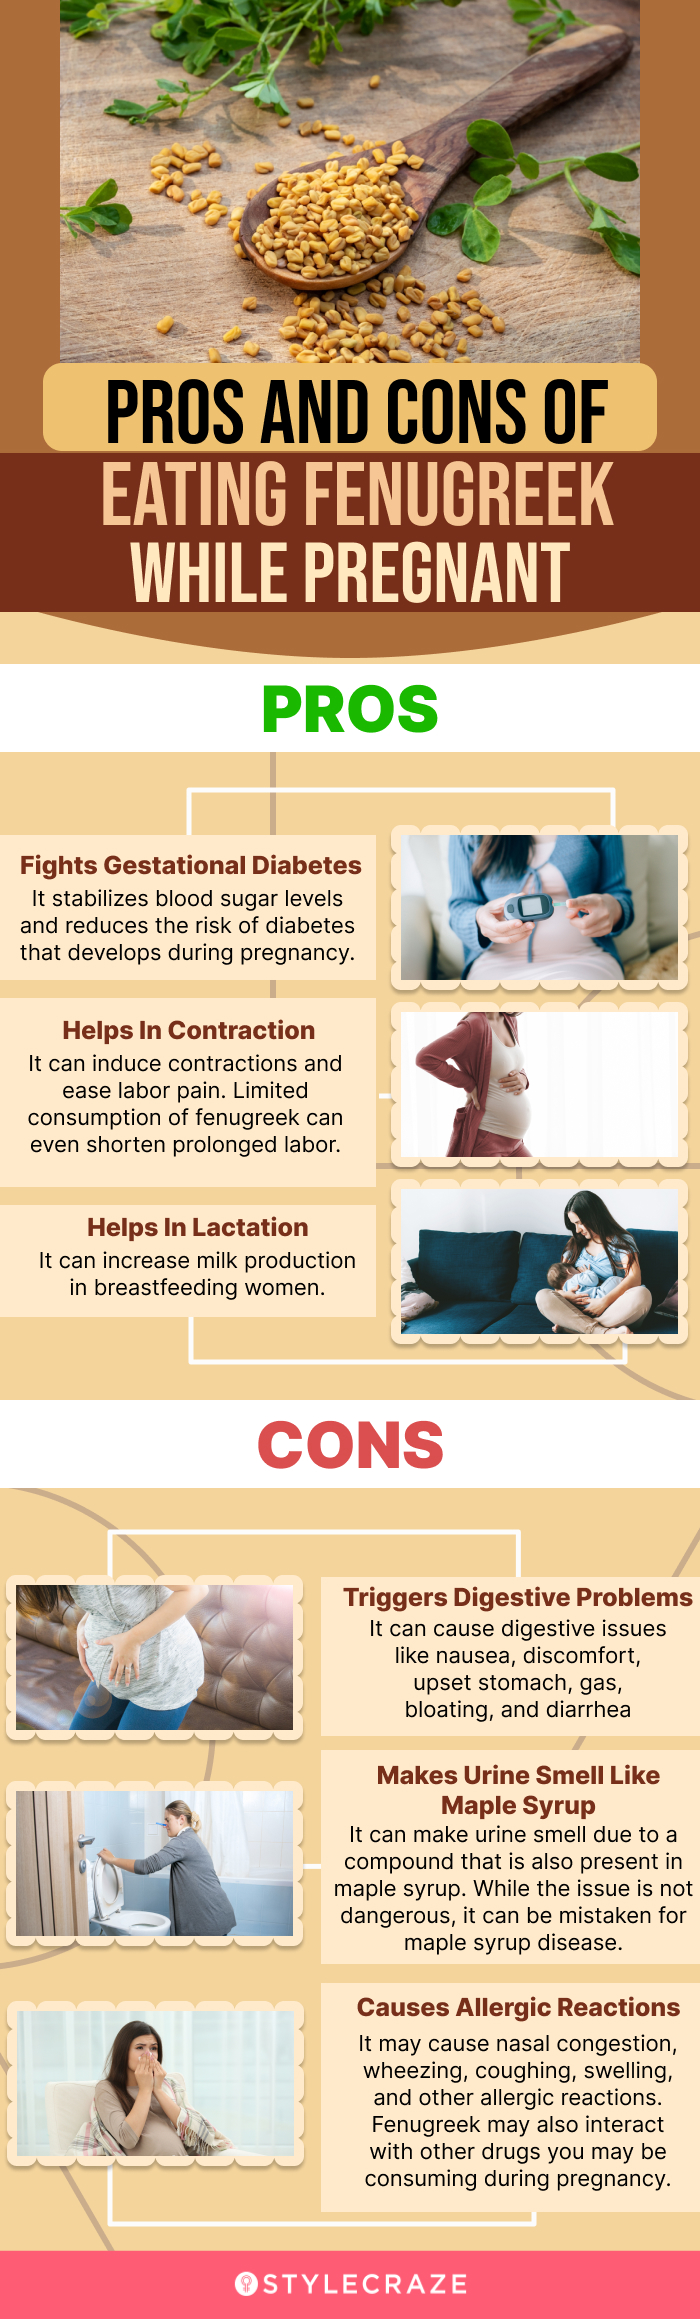 pros and cons of eating fenugreek while pregnant (infographic)